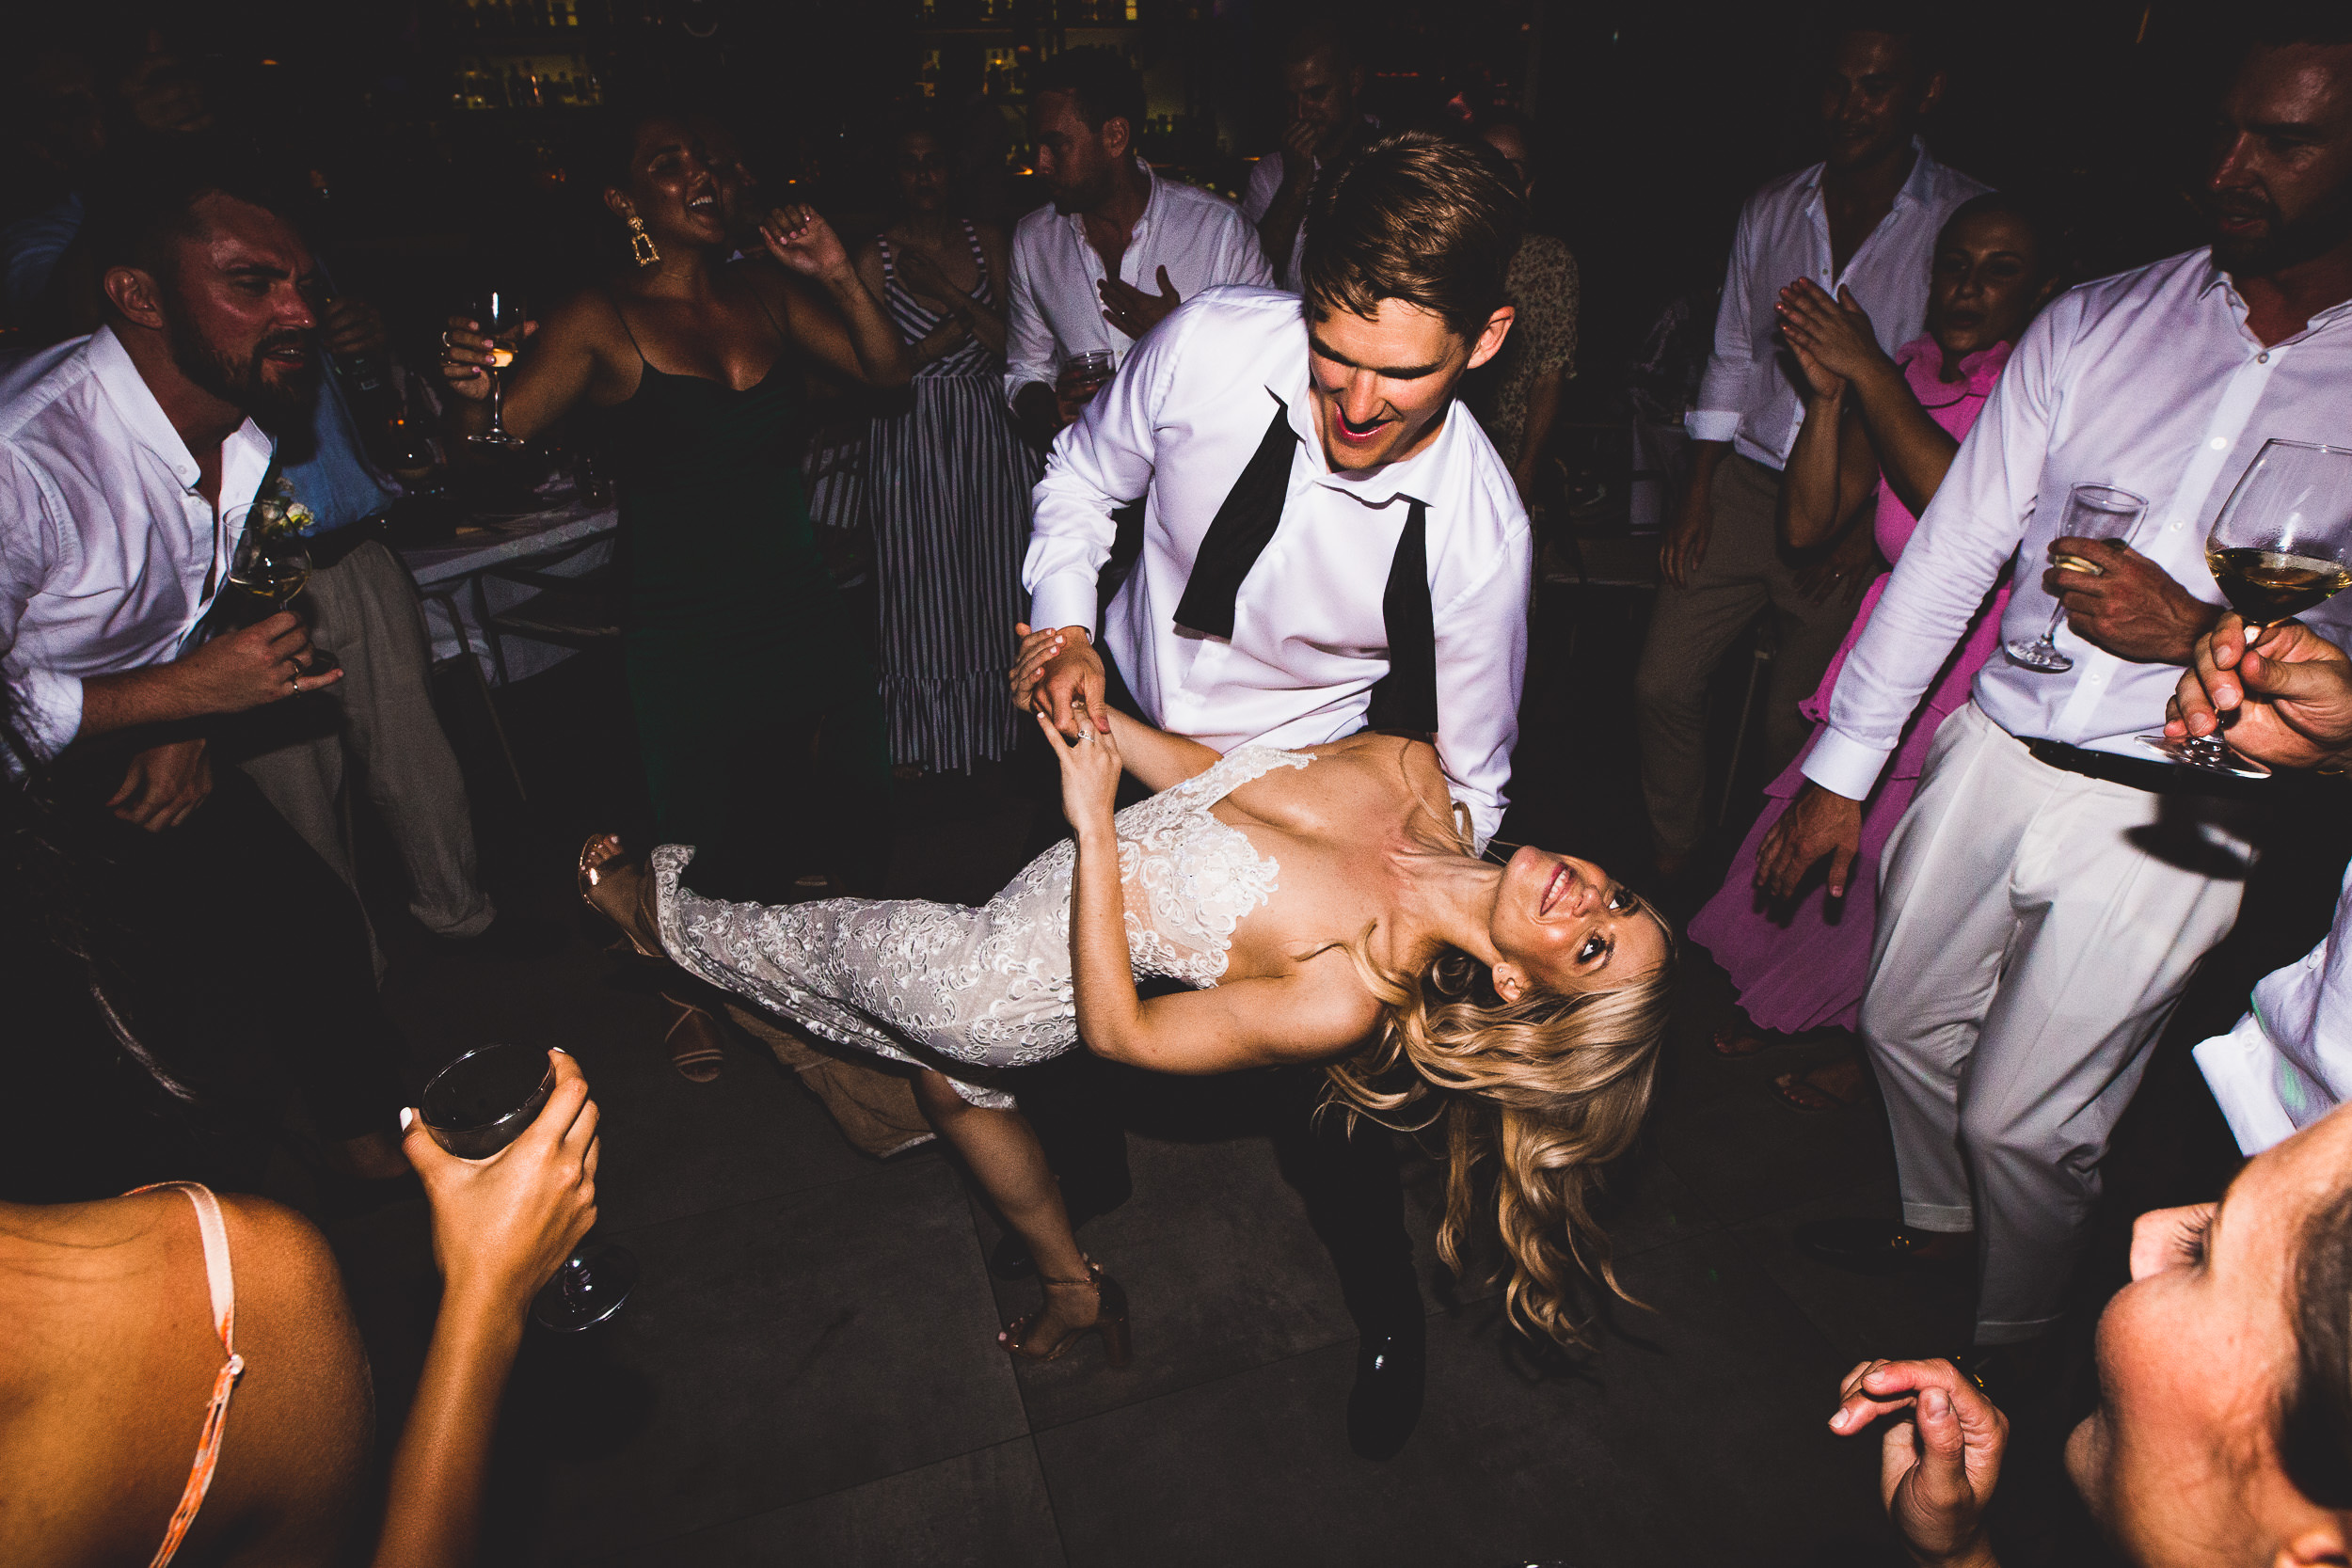 A groom and bride dancing at a wedding reception.